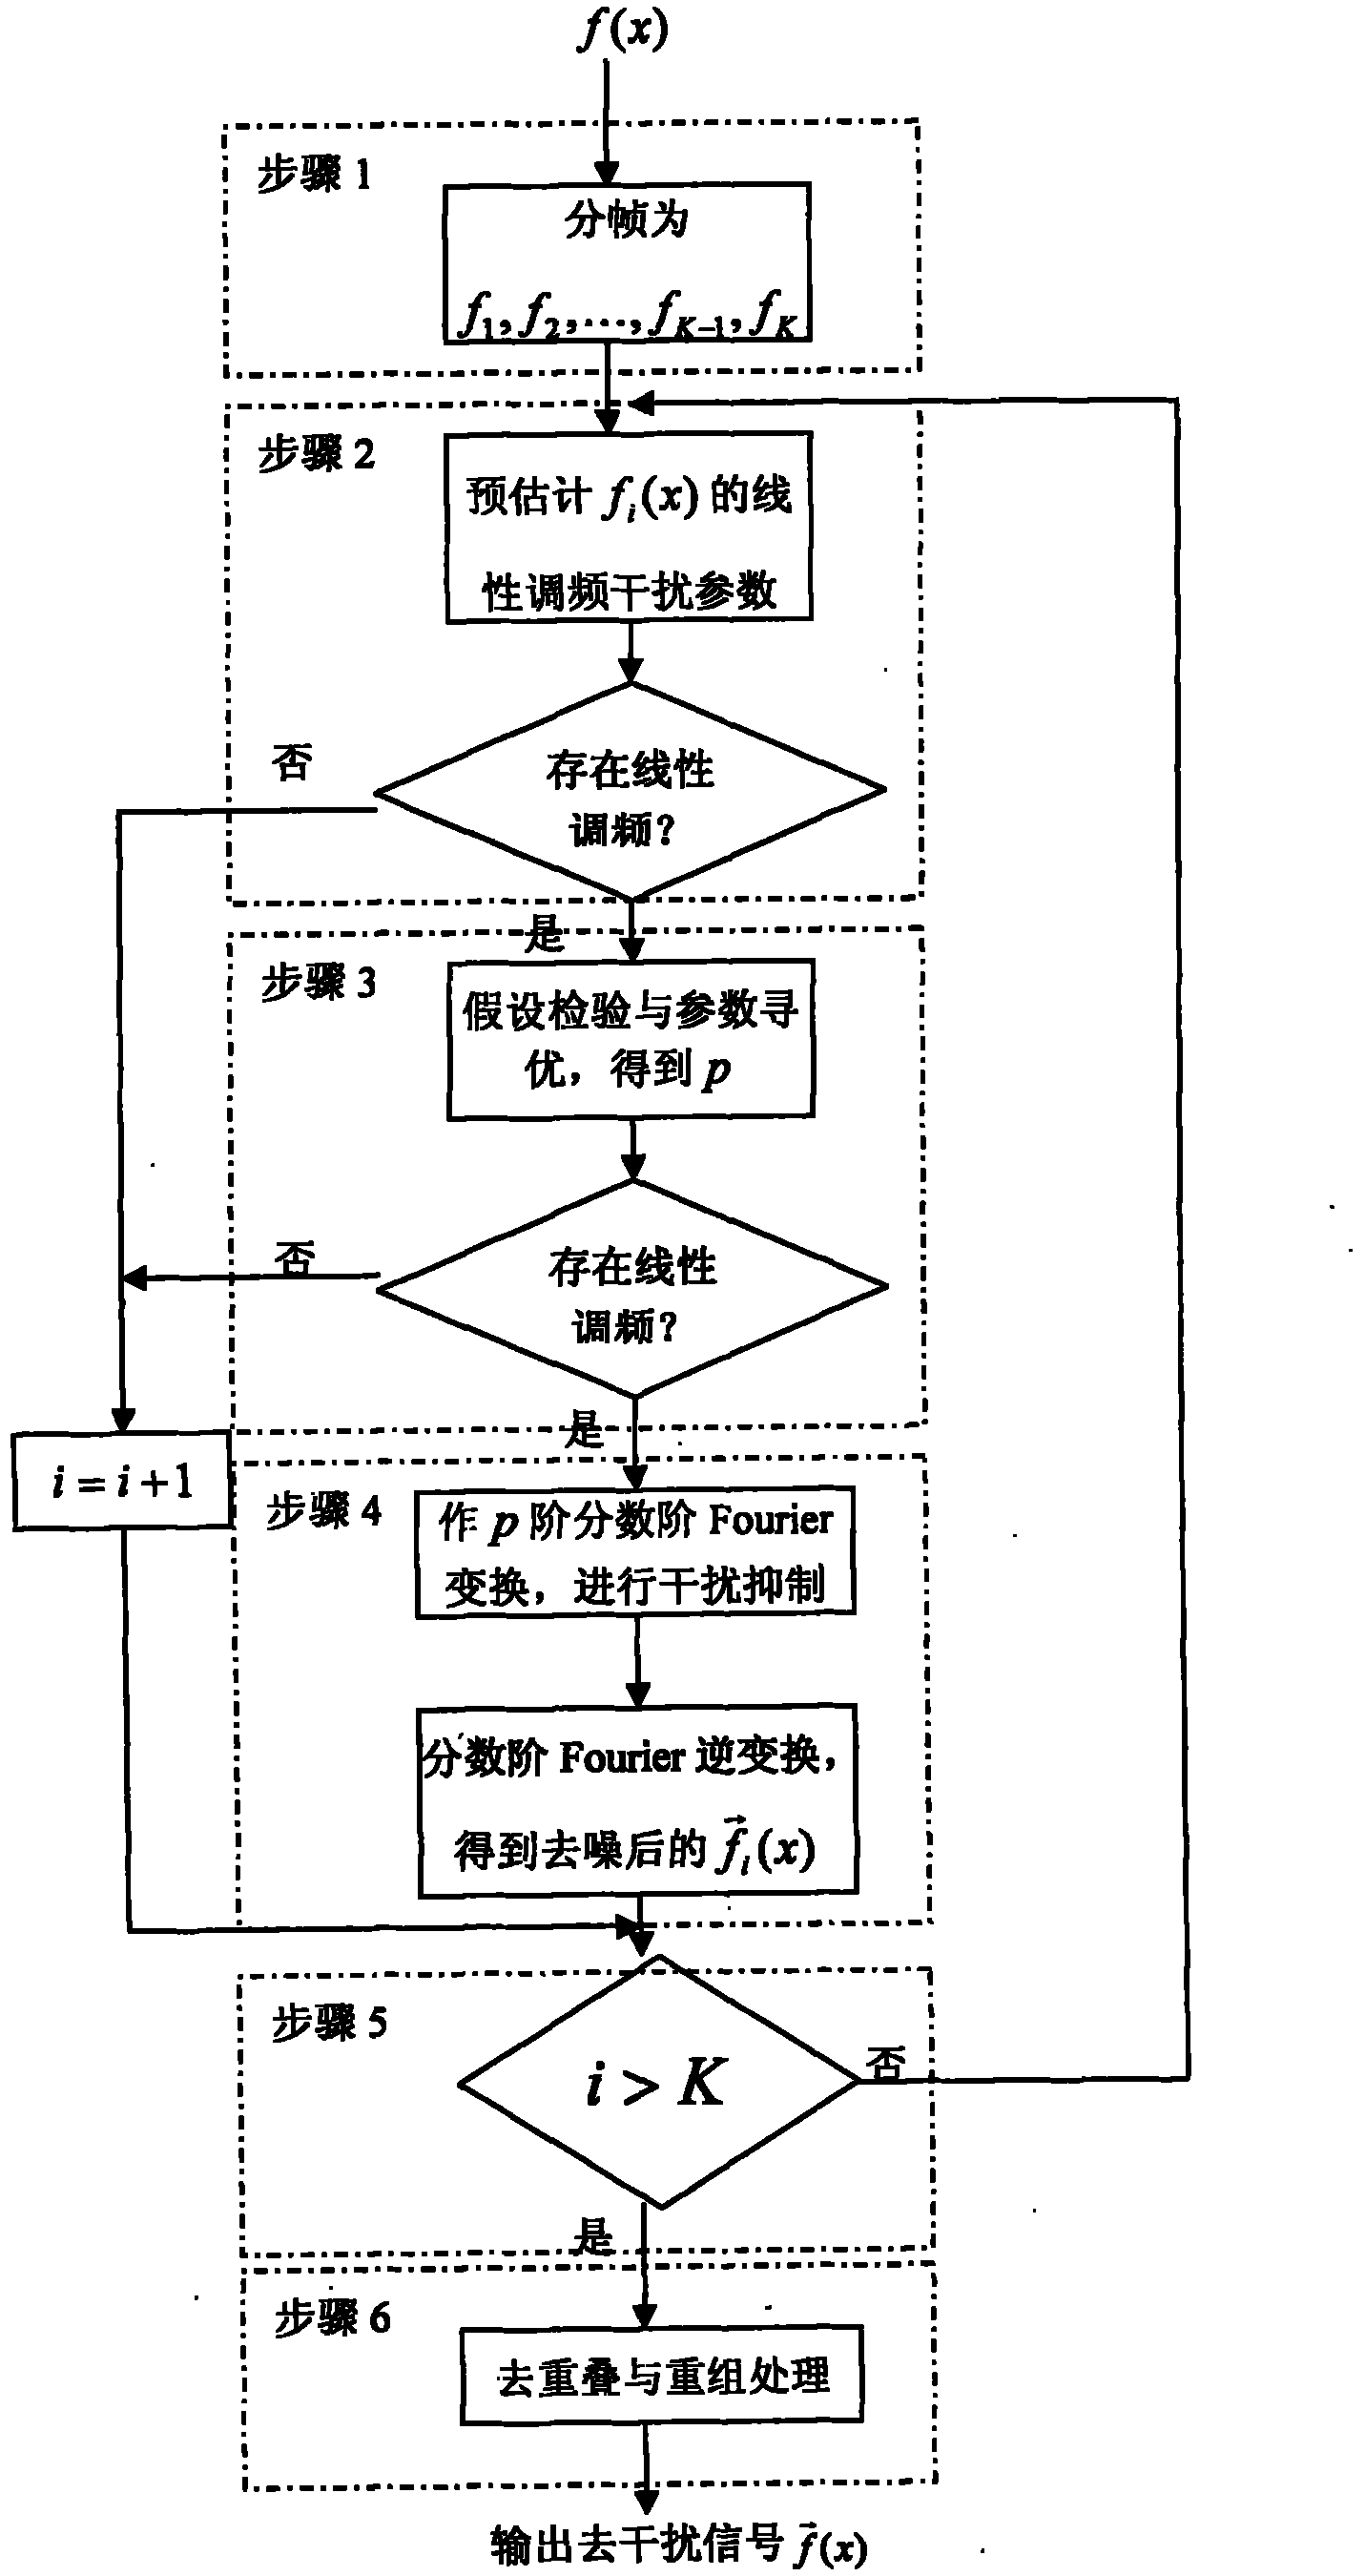 Quick chirp modulation interference detection and suppression method for direct-sequence spread-spectrum communication system